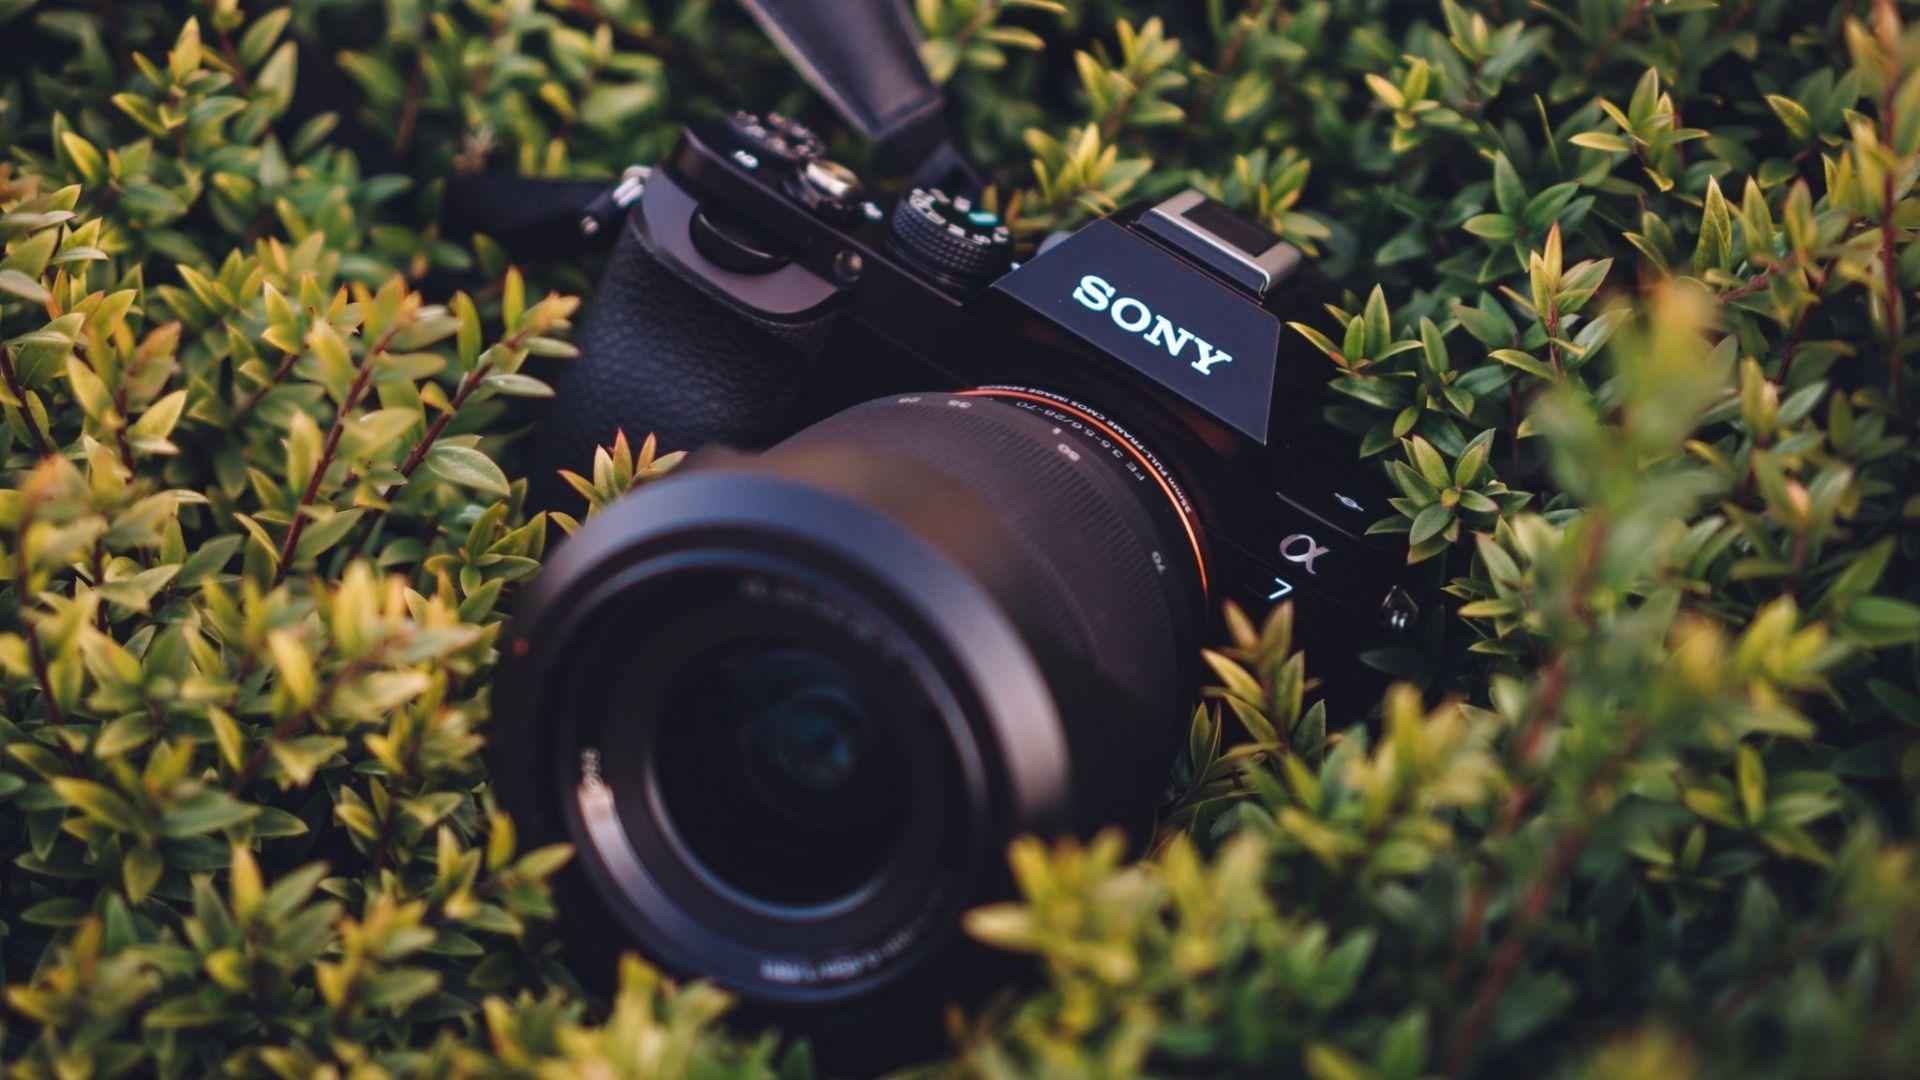 Sony Camera Wallpapers - Top Free Sony Camera Backgrounds ...